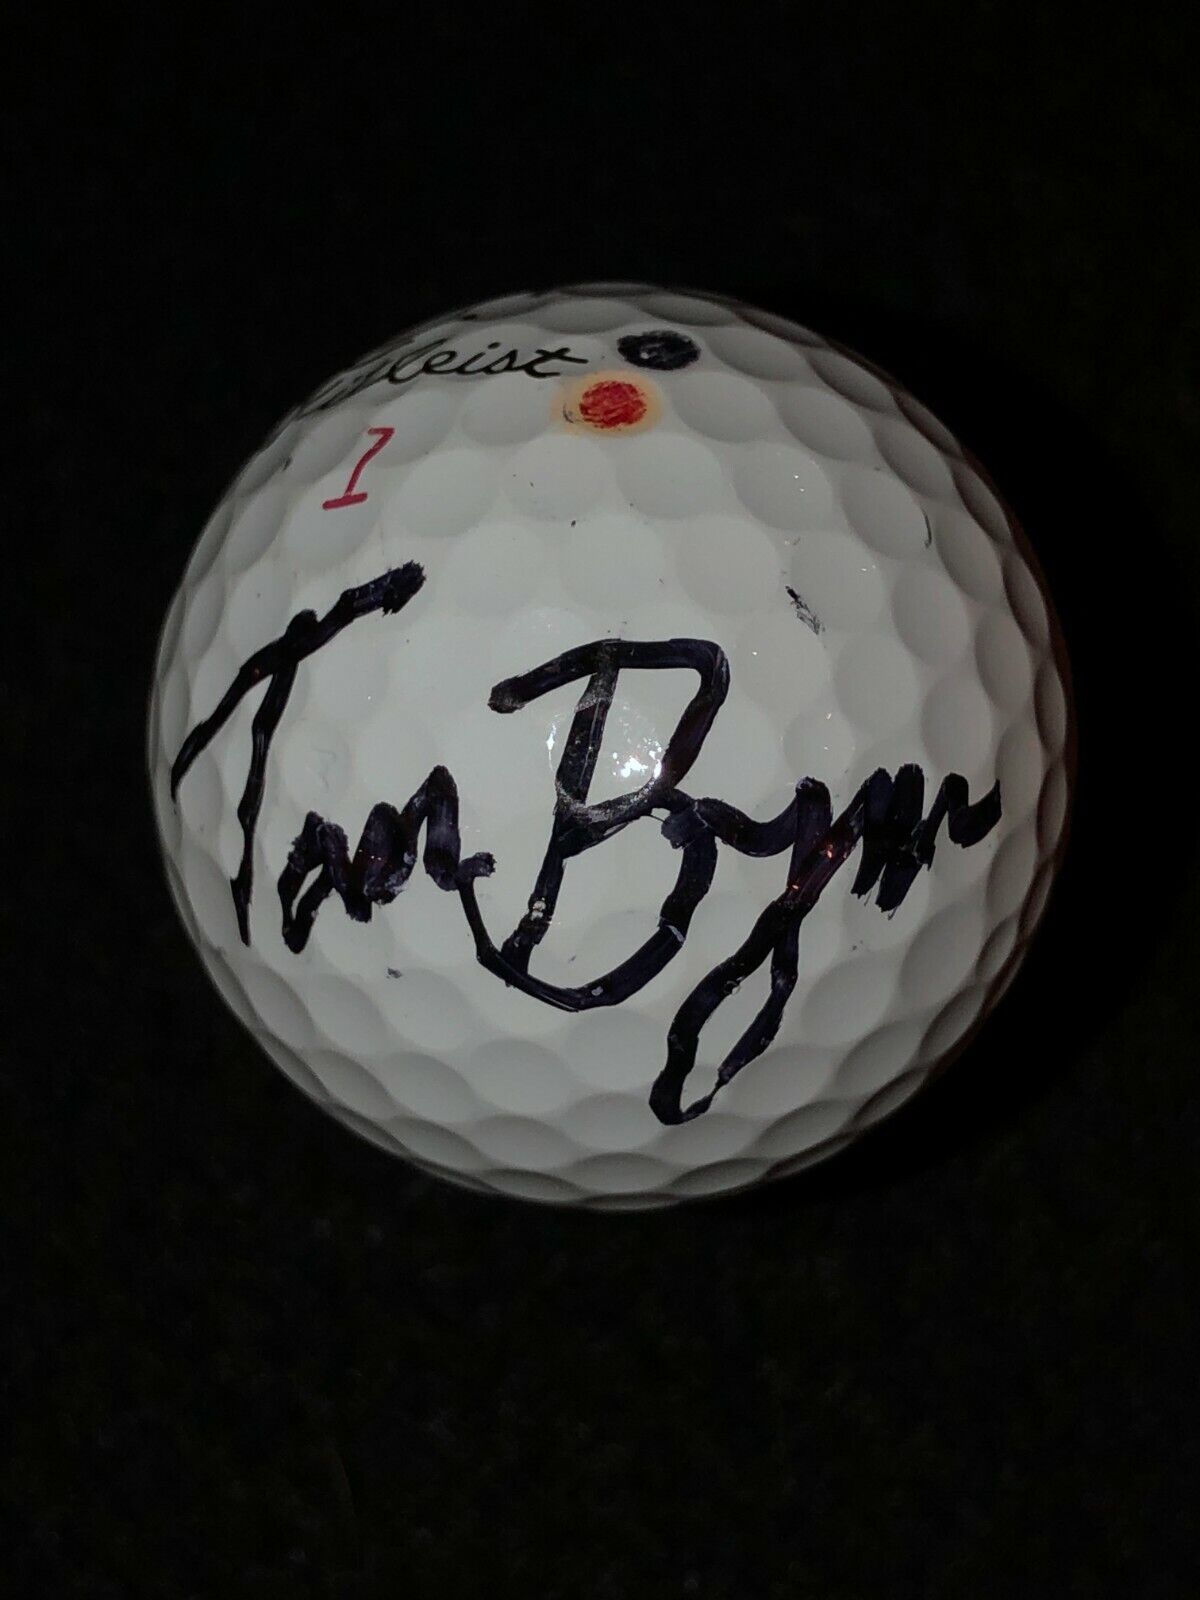 Pga Pro Tom Byrum - Autographed Titleist Golf Ball Hand Signed Course Used